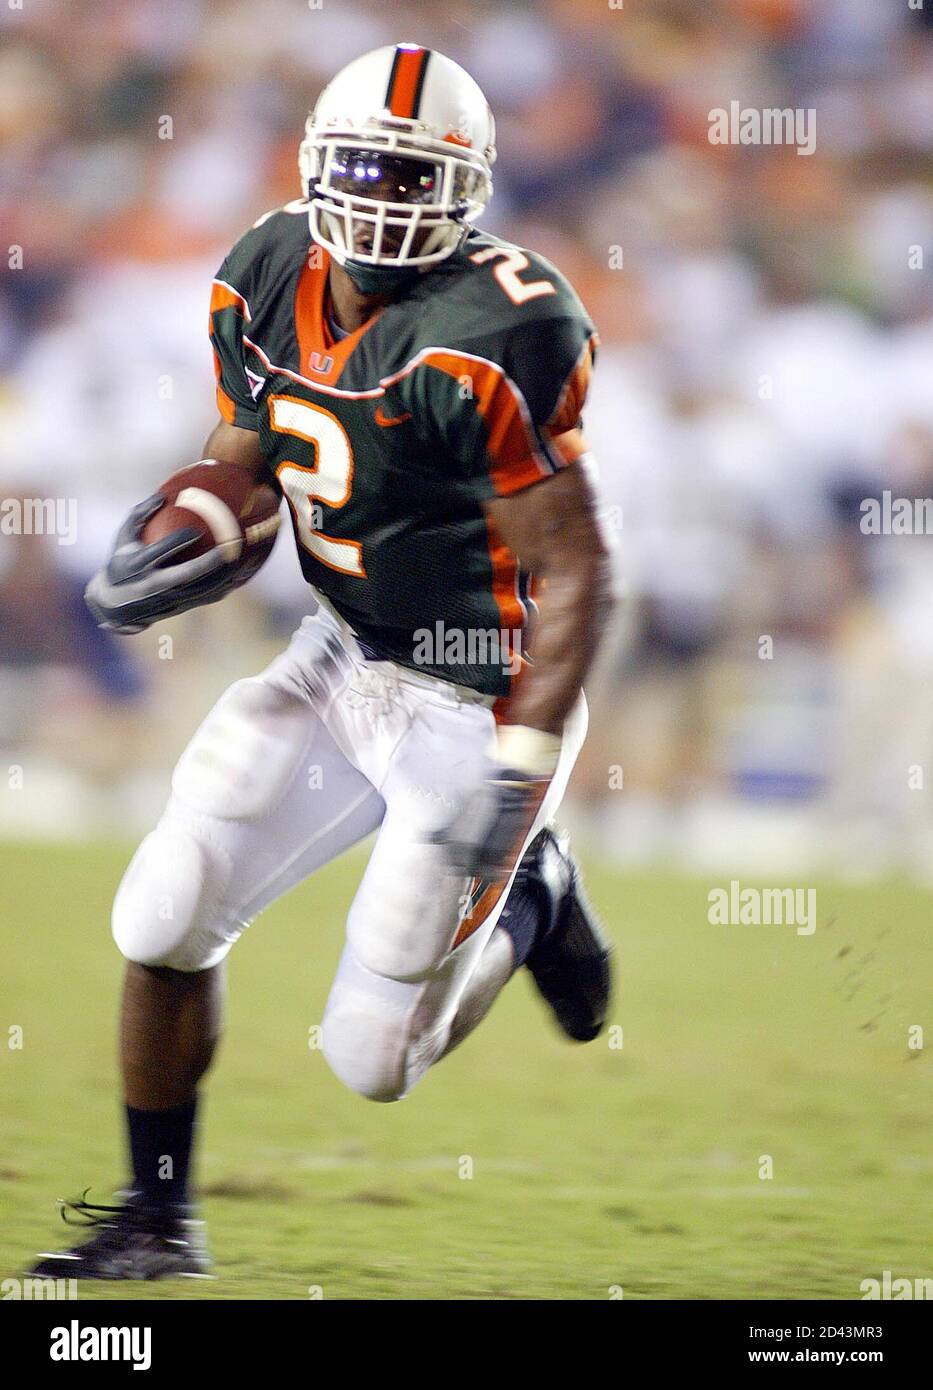 miami-hurricanes-running-back-willis-mcgahee-2-carries-the-ball-for-a-fourth-quarter-touchdown-against-the-pittsburgh-panthers-at-the-orange-bowl-in-miami-florida-november-21-2002-mcgahee-is-a-front-runner-for-the-heisman-trophy-reutersmarc-serota-ms-2D43MR3.jpg